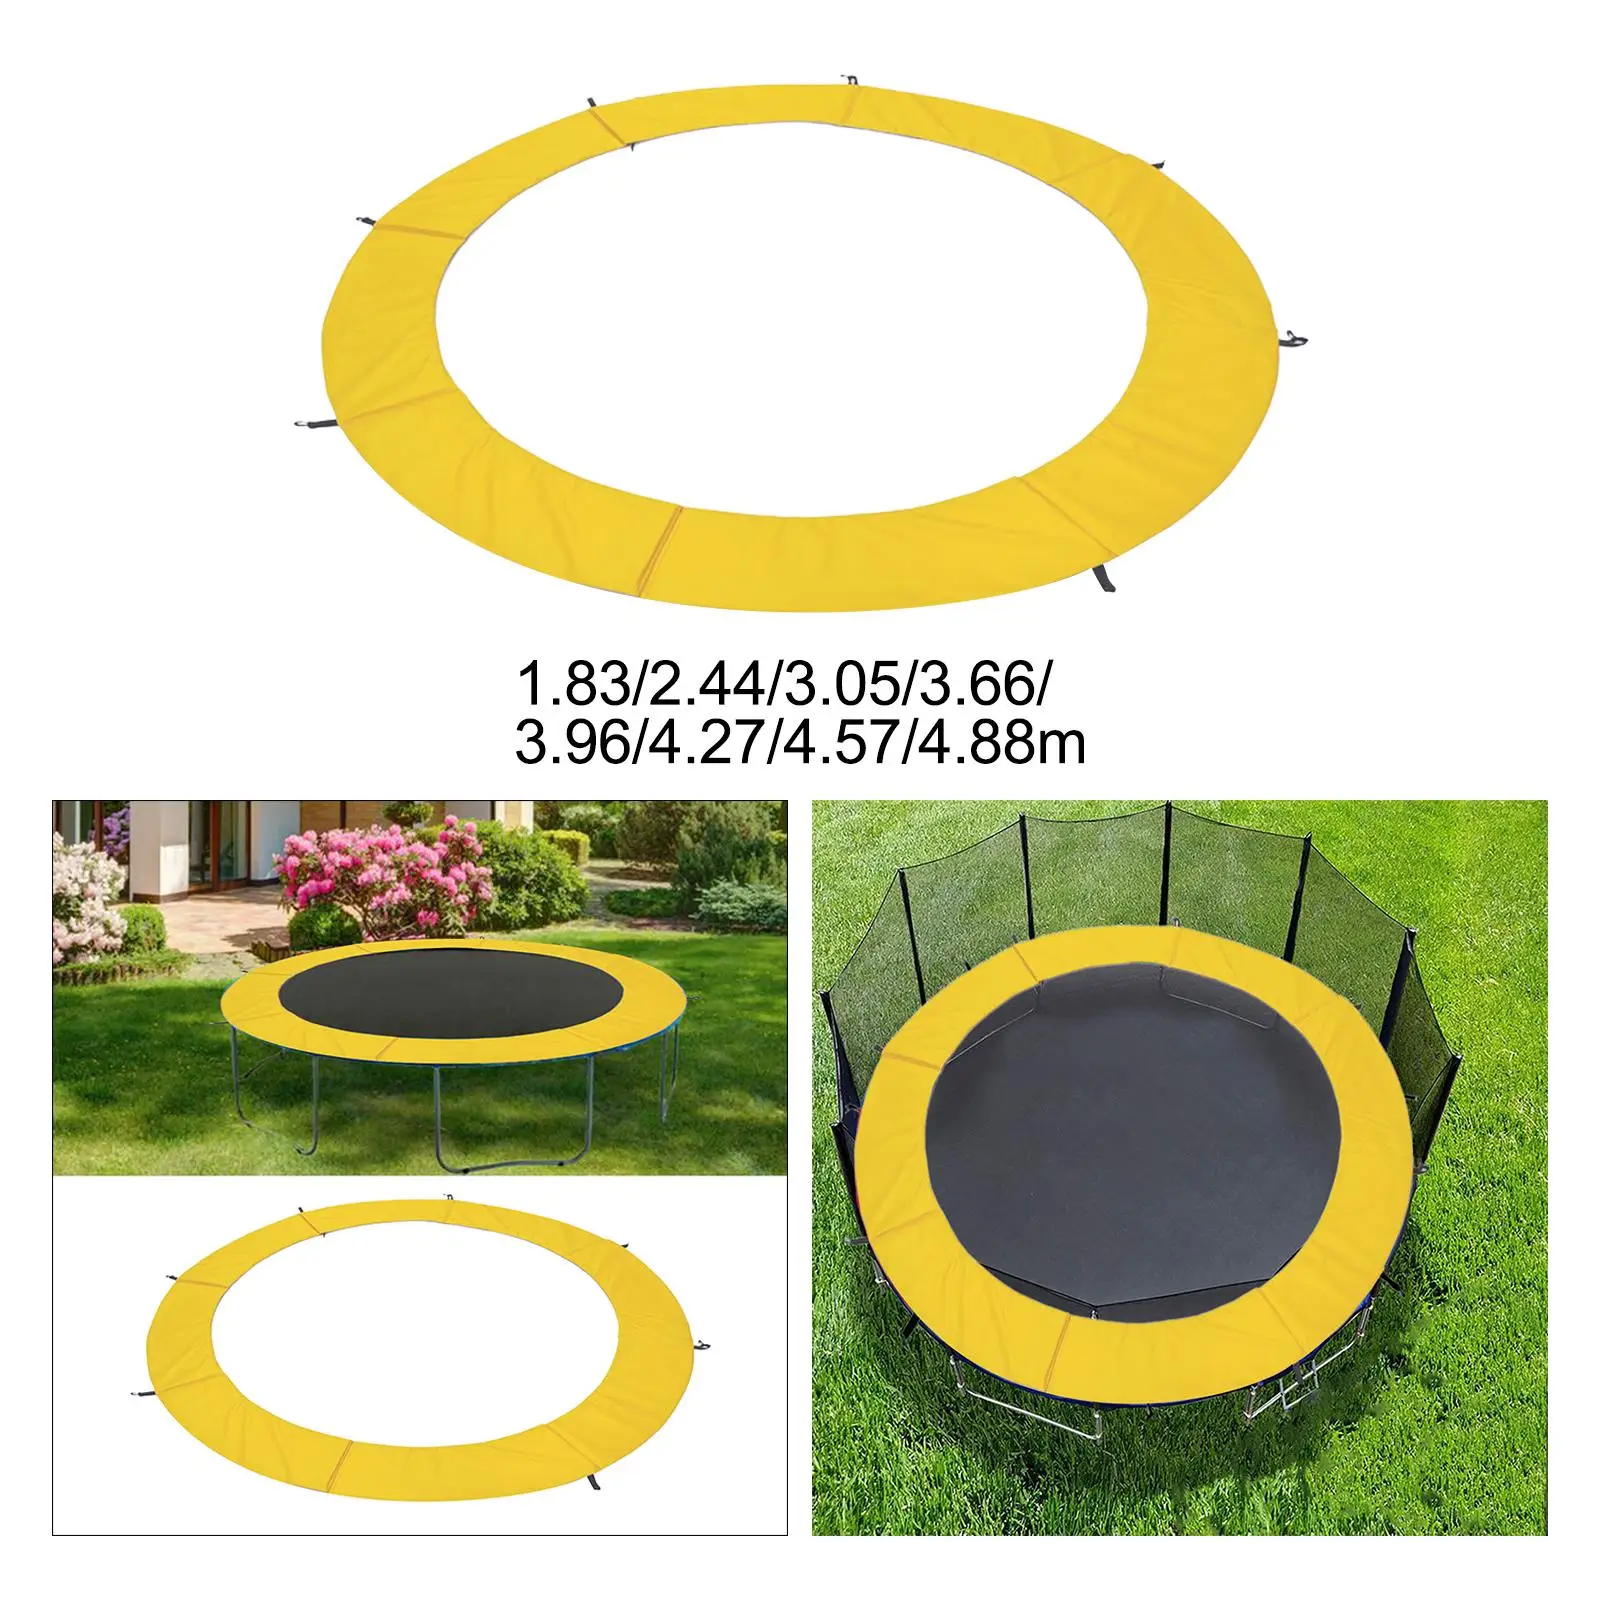 Trampoline Pad Cover Replacement Side Guard Trampoline Cover for Edge Protection Easy to Install